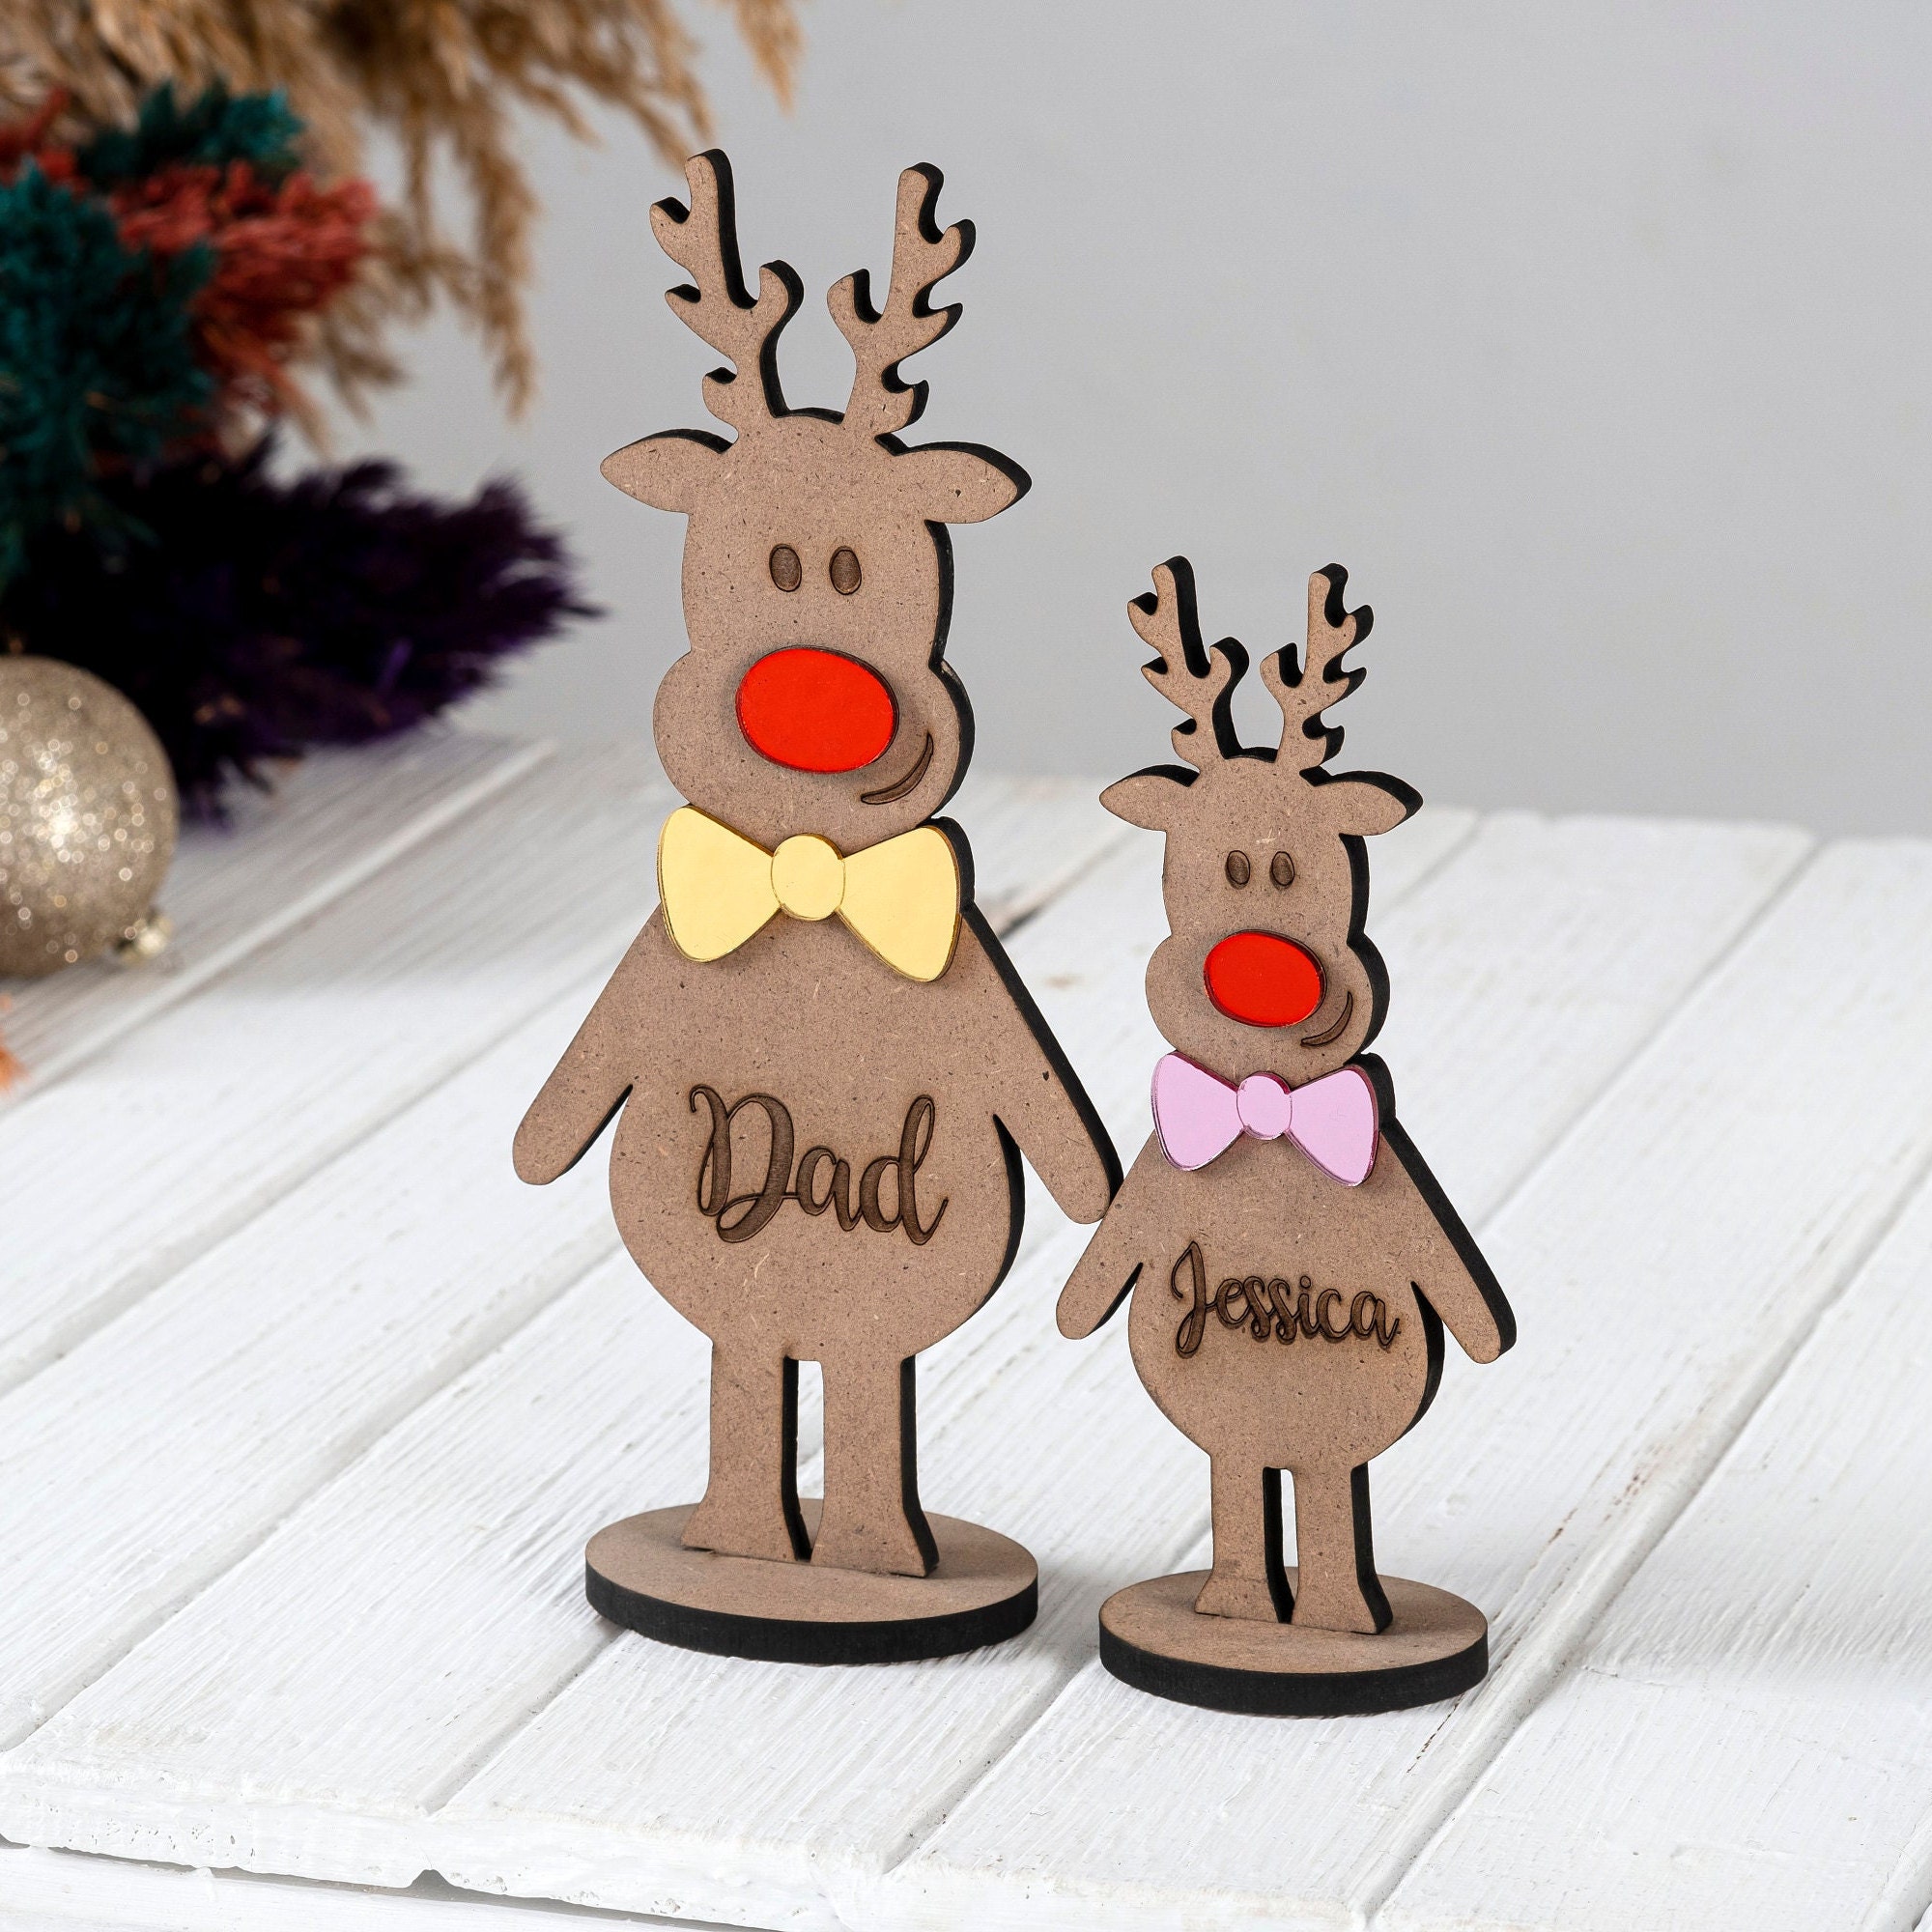 Reindeer Christmas Ornaments Personalized Gift for Kids Wooden Tree Decor  Gift Name Tags 